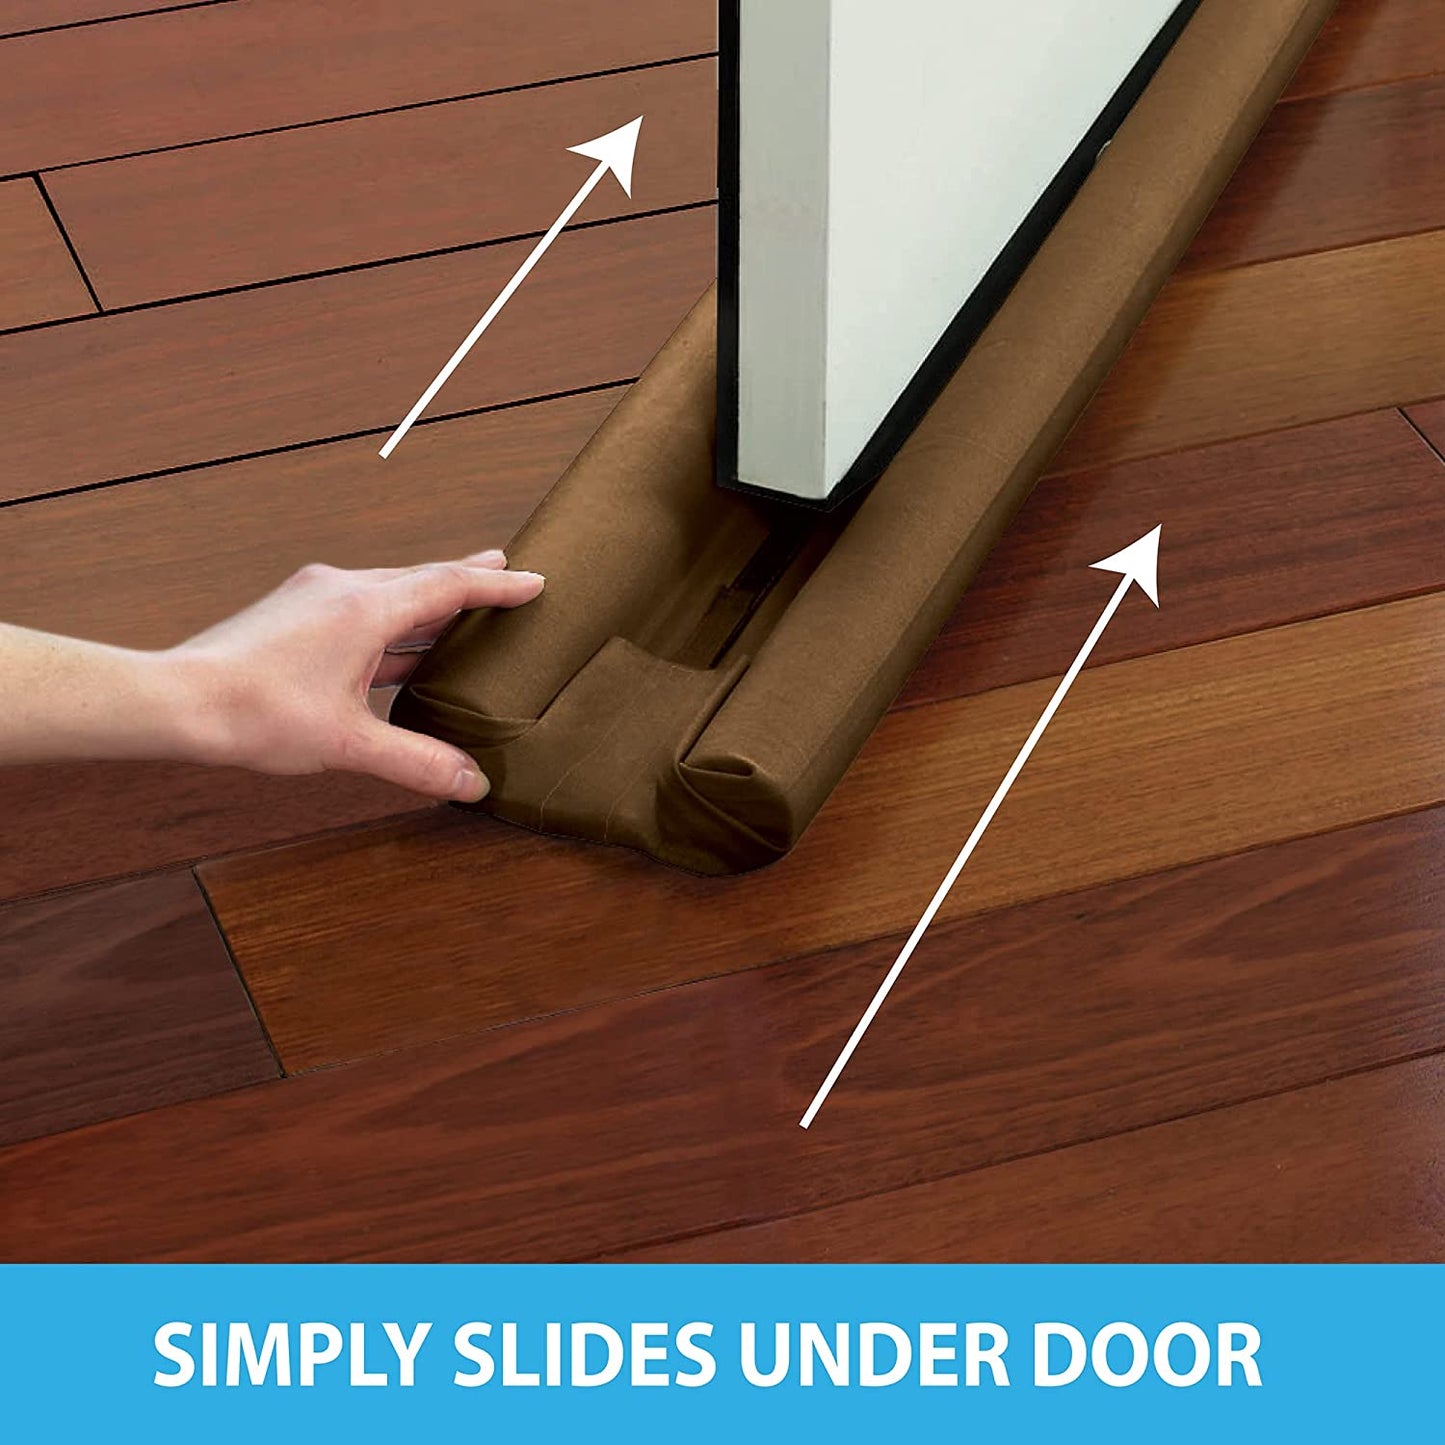 Single, Window and Door Draft Stopper, Bottom-of-Door Soundproofing, Trademarked and Patented Original Under-Door Dust, Wind, and Noise Draft Stopper, 36 Inches, Brown